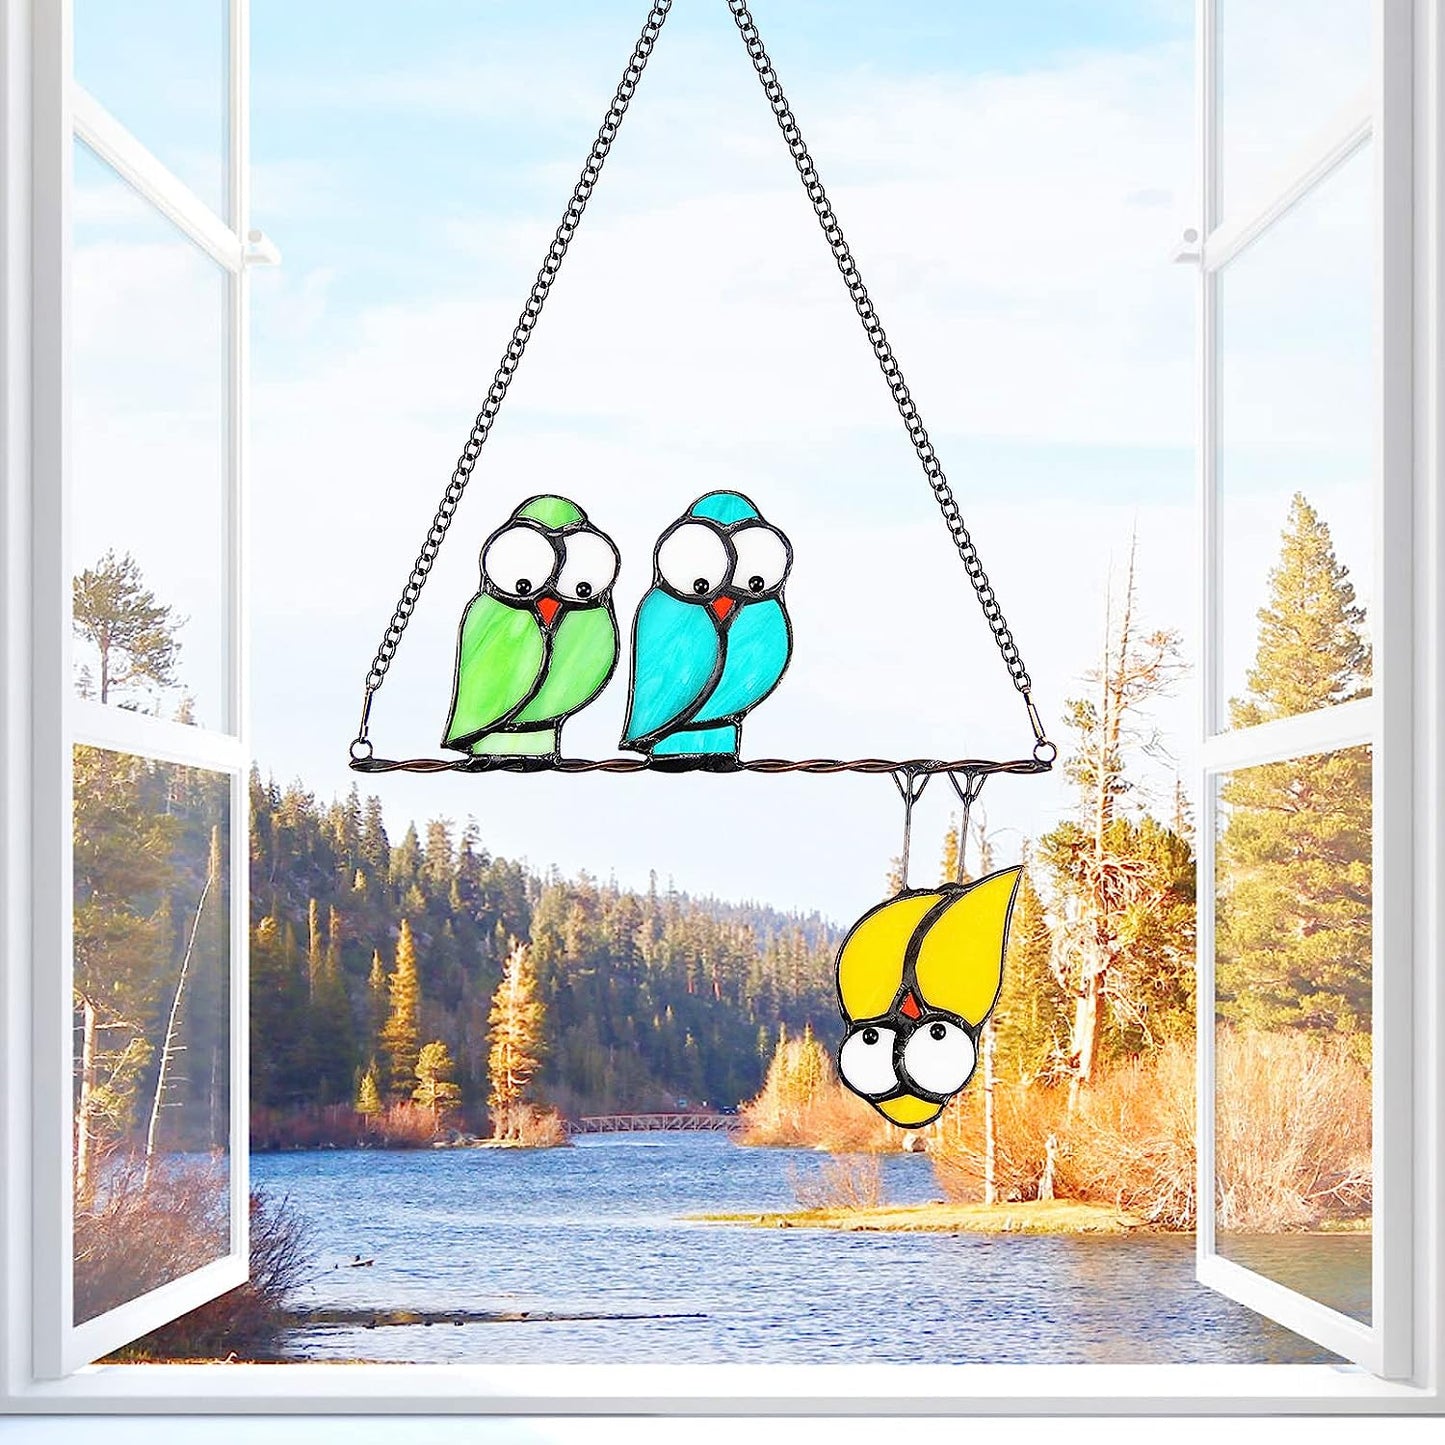 Multicolor Bird Stained Glass Window Hangings Decor